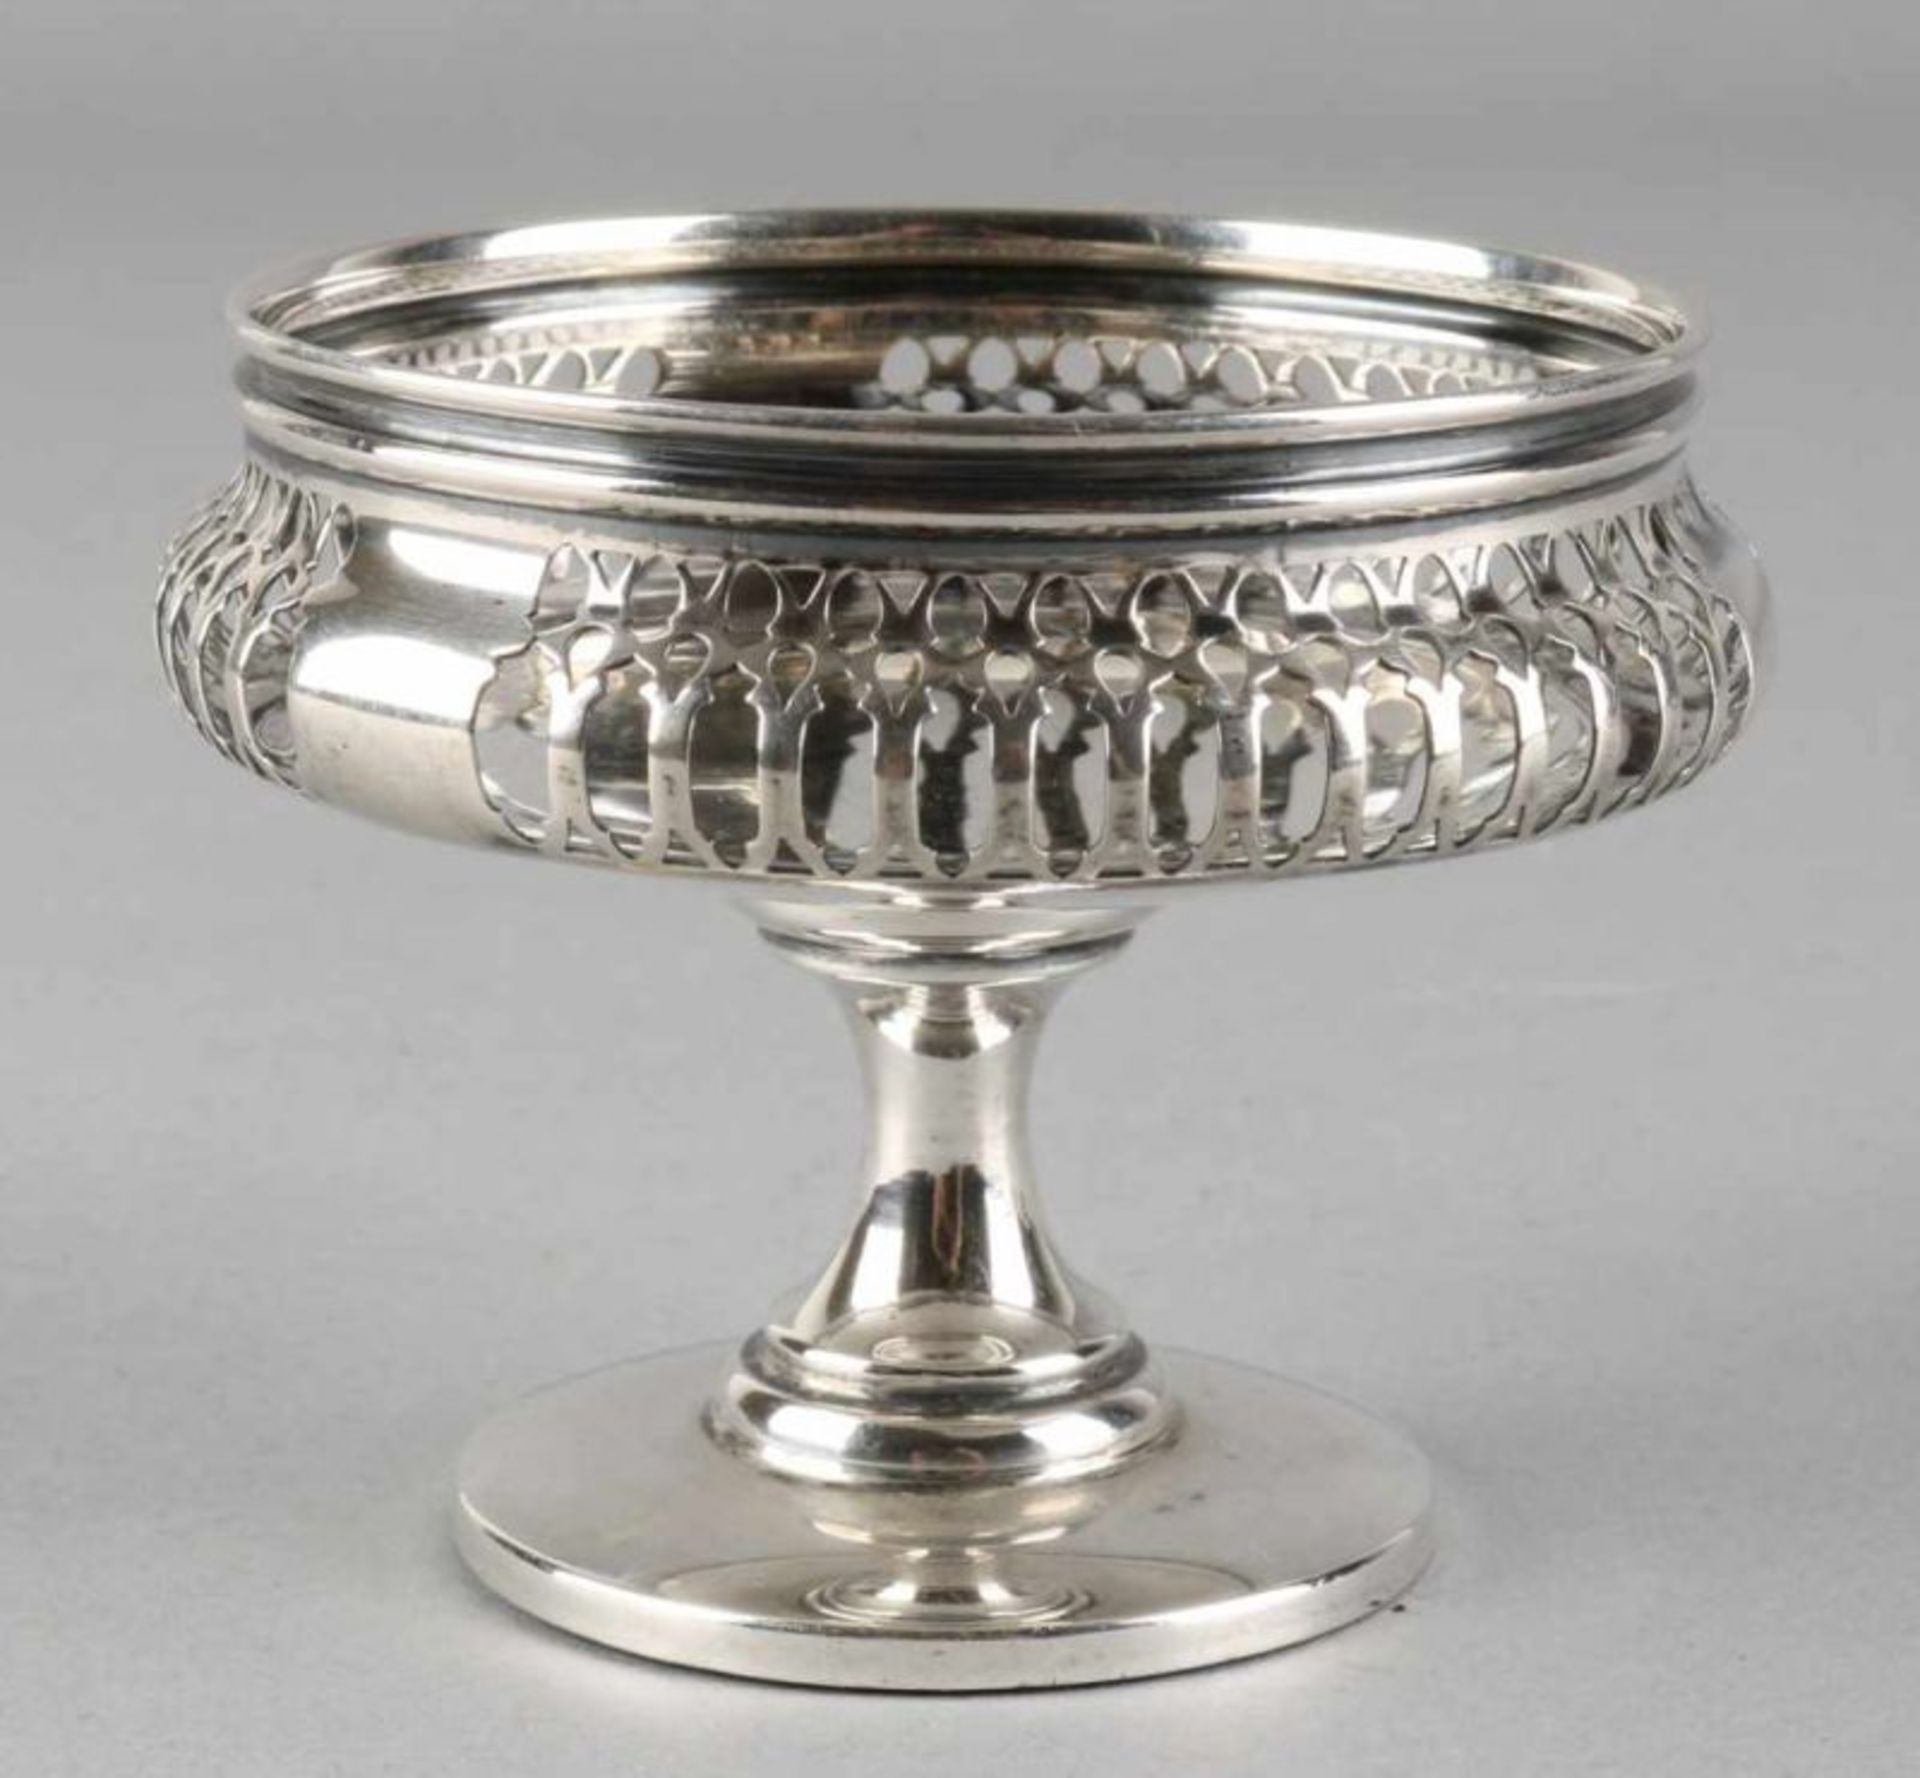 Silver tassa, 925/000, with fringed edges and smooth foot. MT .: J & R Griffin, Chester jl .: O: